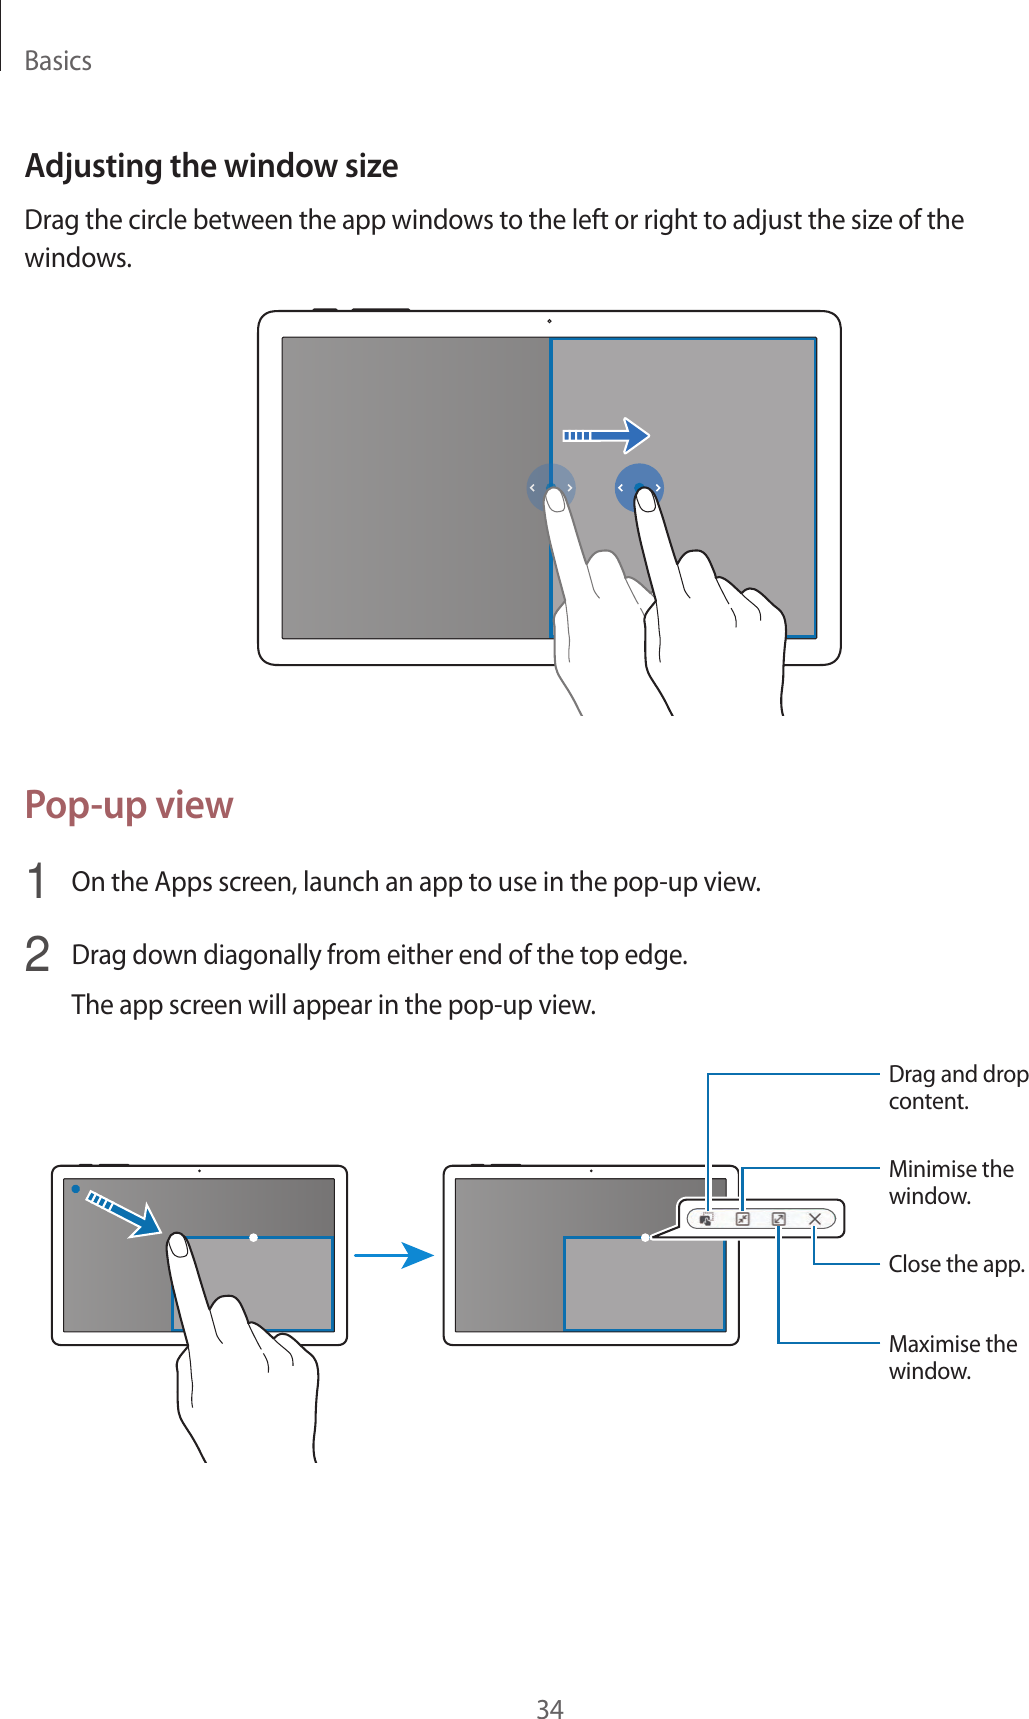 Basics34Adjusting the window sizeDrag the circle between the app windows to the left or right to adjust the size of the windows.Pop-up view1  On the Apps screen, launch an app to use in the pop-up view.2  Drag down diagonally from either end of the top edge.The app screen will appear in the pop-up view.Minimise the window.Close the app.Maximise the window.Drag and drop content.